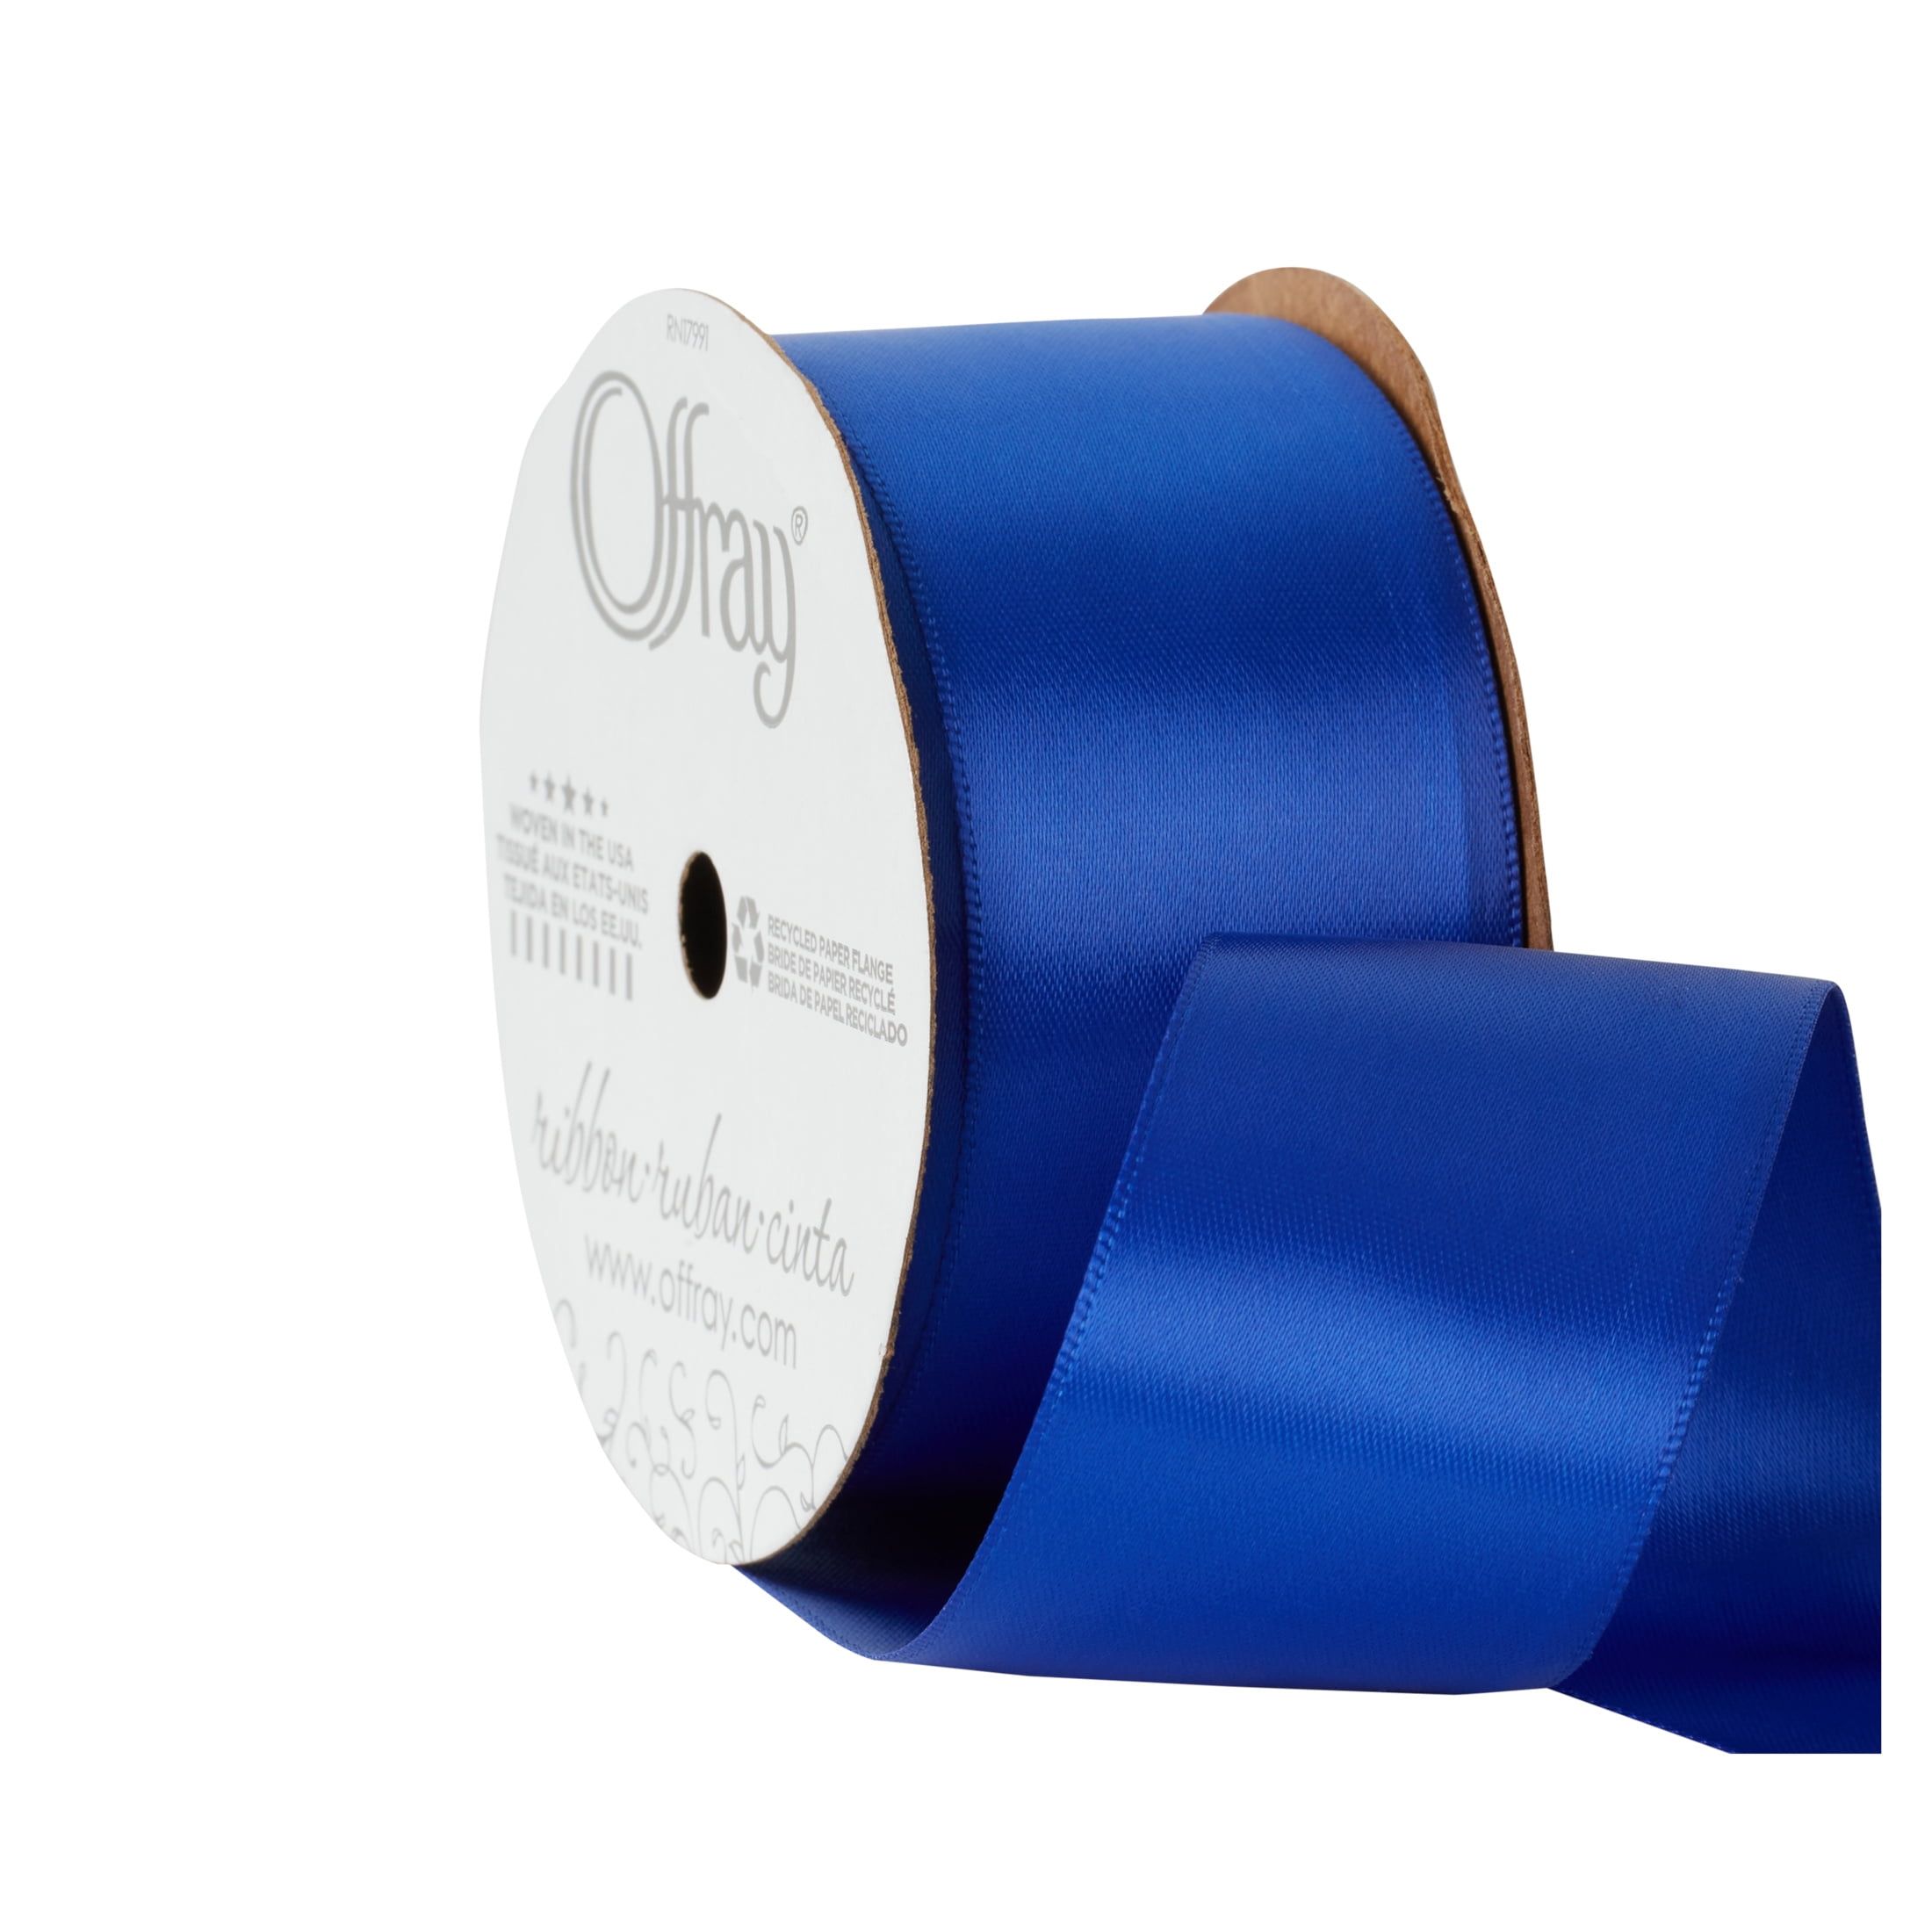 Electric Blue 1 1/2 Inch x 50 Yards Satin Double Face Ribbon